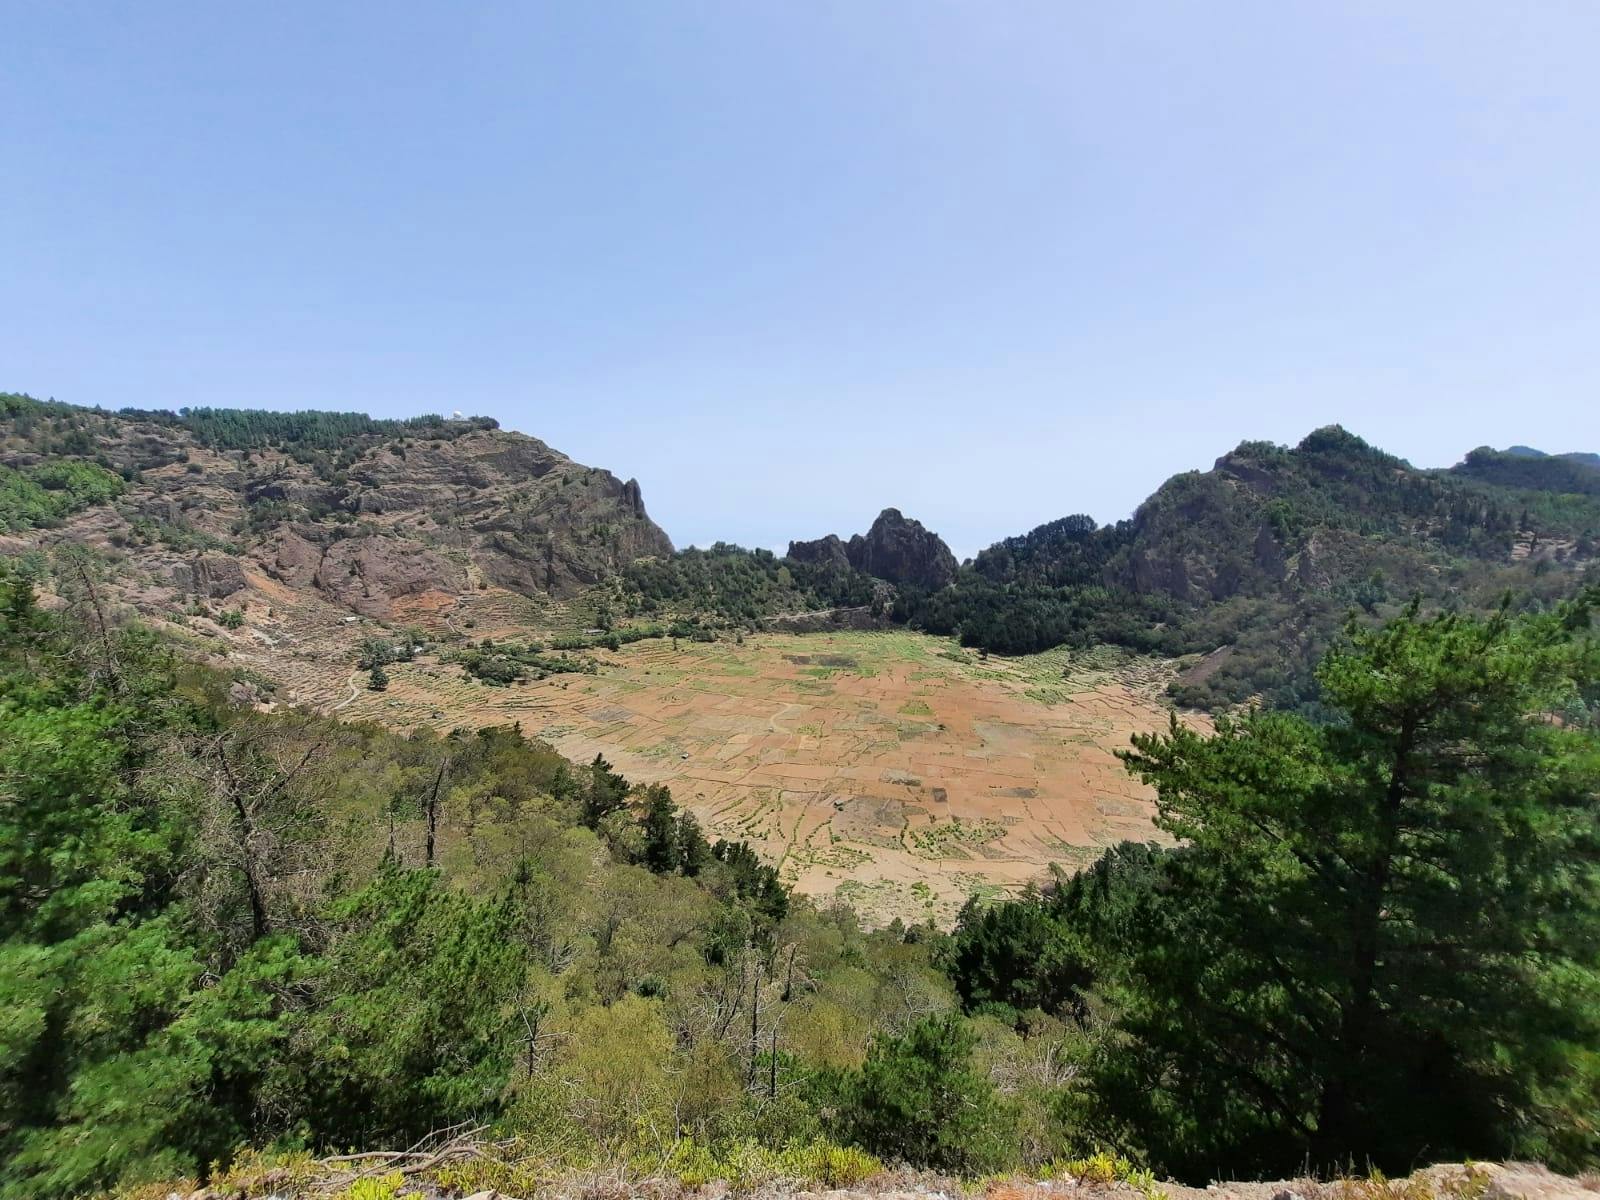 Guided hike from Cova volcano crater to the Green Valley of Paul in